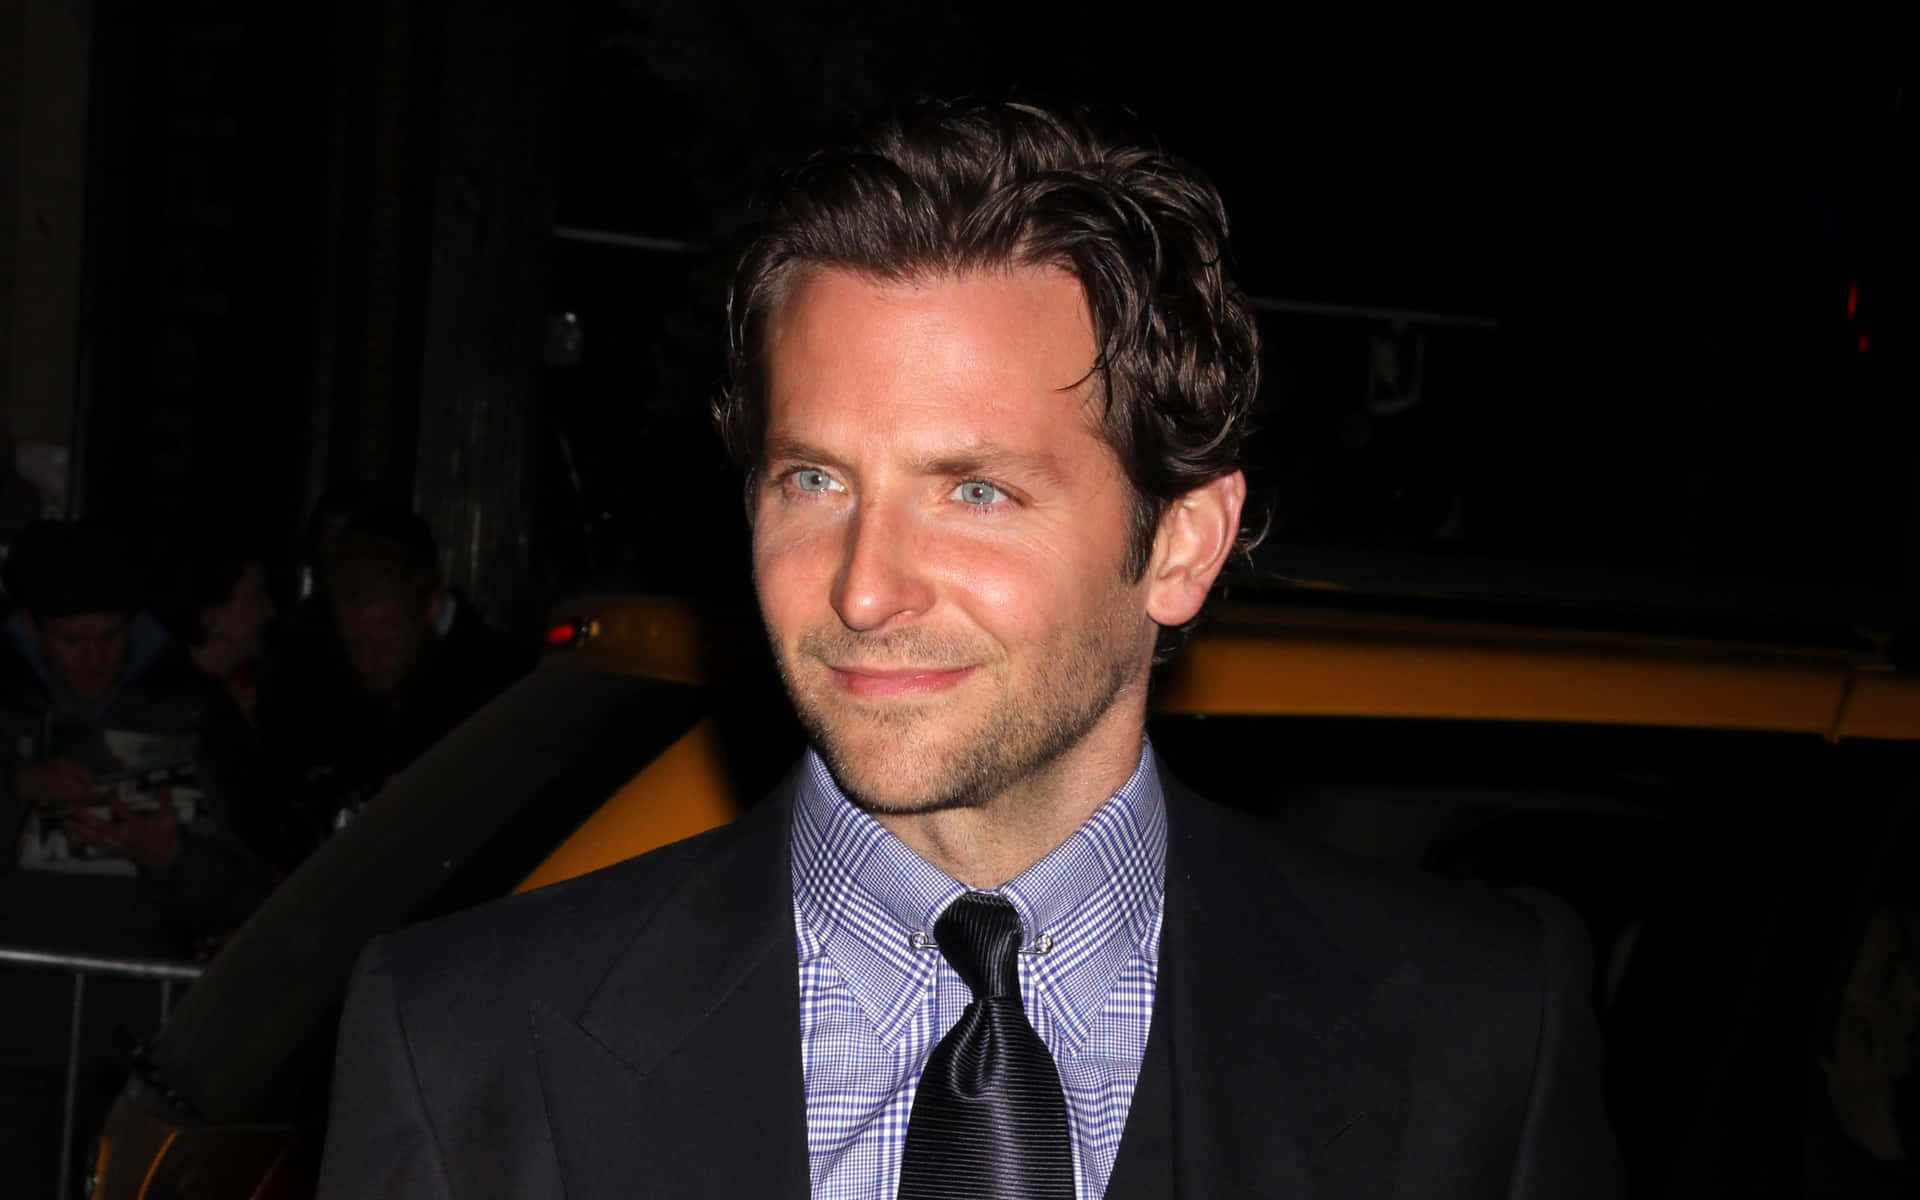 Bradley Cooper graces the stage at the 2019 Golden Globe Awards.